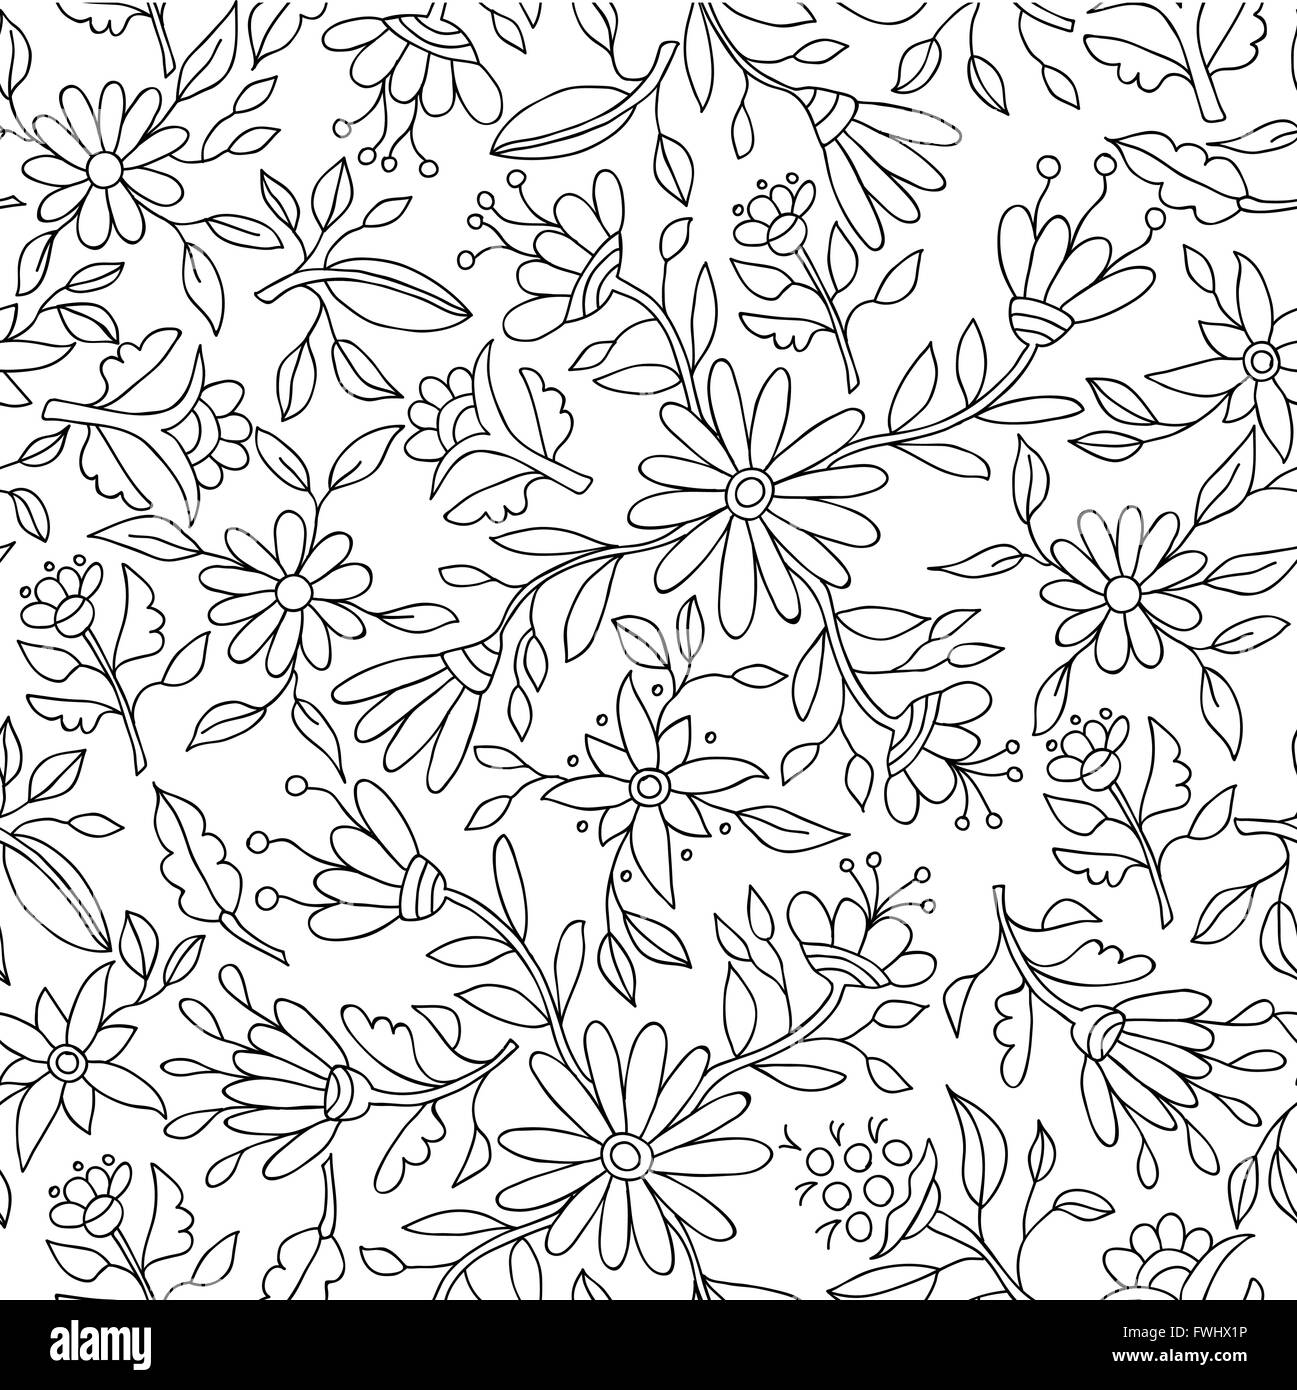 Floral spring pattern background in black and white with flower